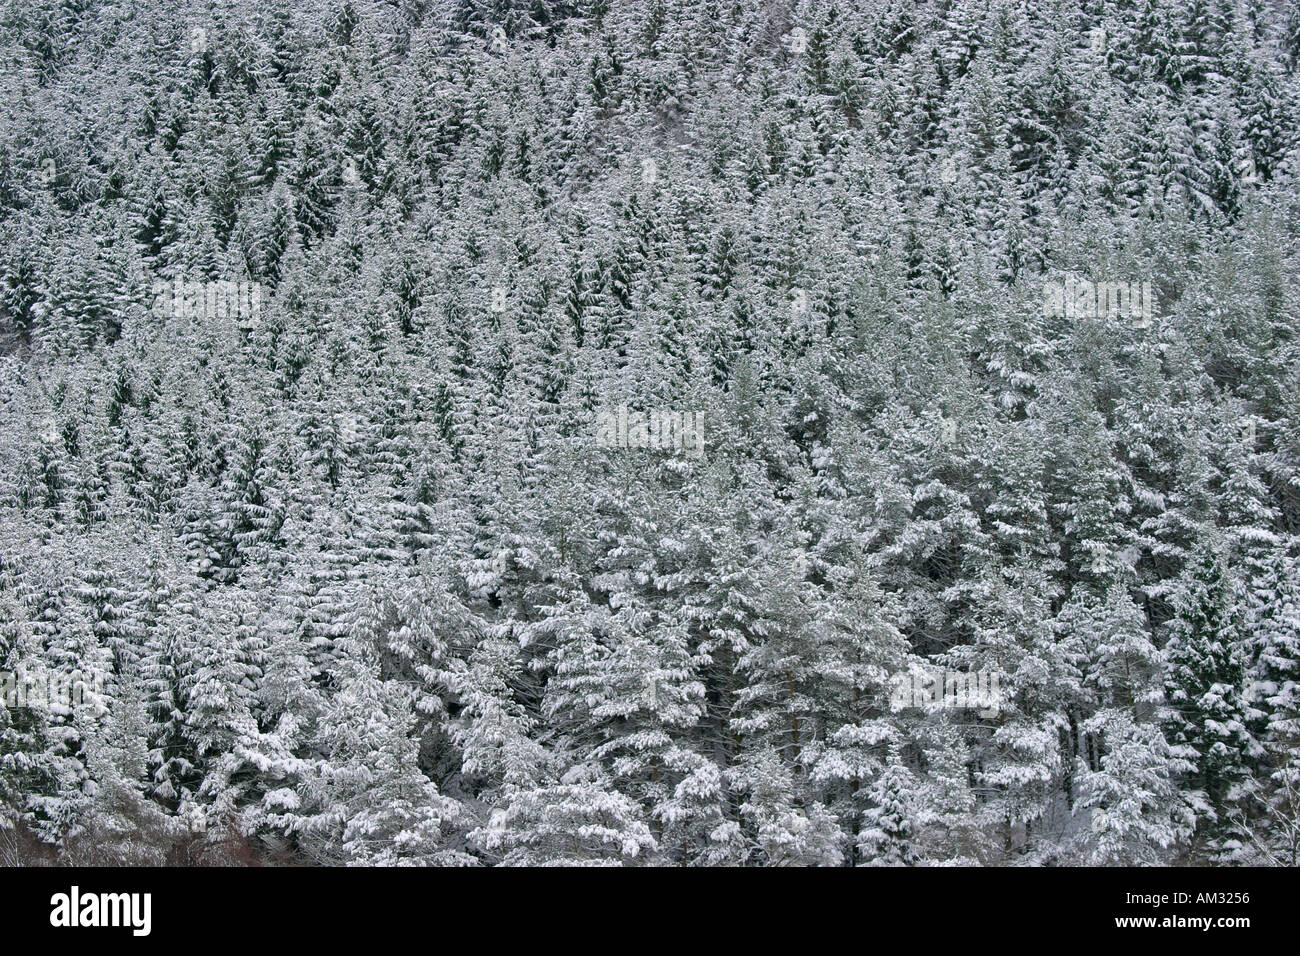 Evergreen Forest Snow Stock Photo